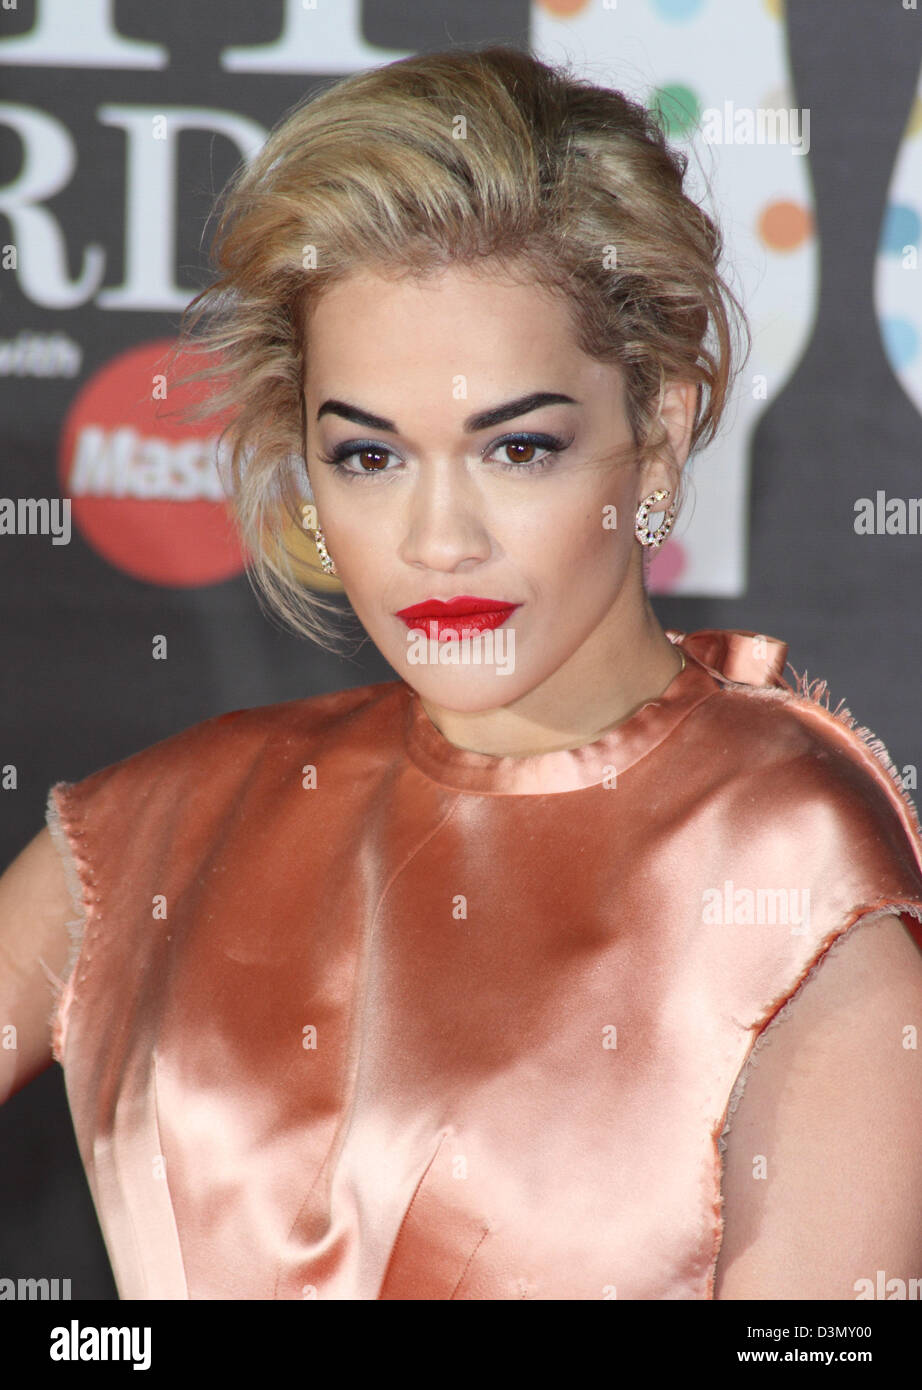 London, UK. 20th February 2013. Rita Ora at the The 2013 Brit Awards at the O2 Arena, London - February 20th 2013  Photo by Keith Mayhew/ Alamy Live News Stock Photo